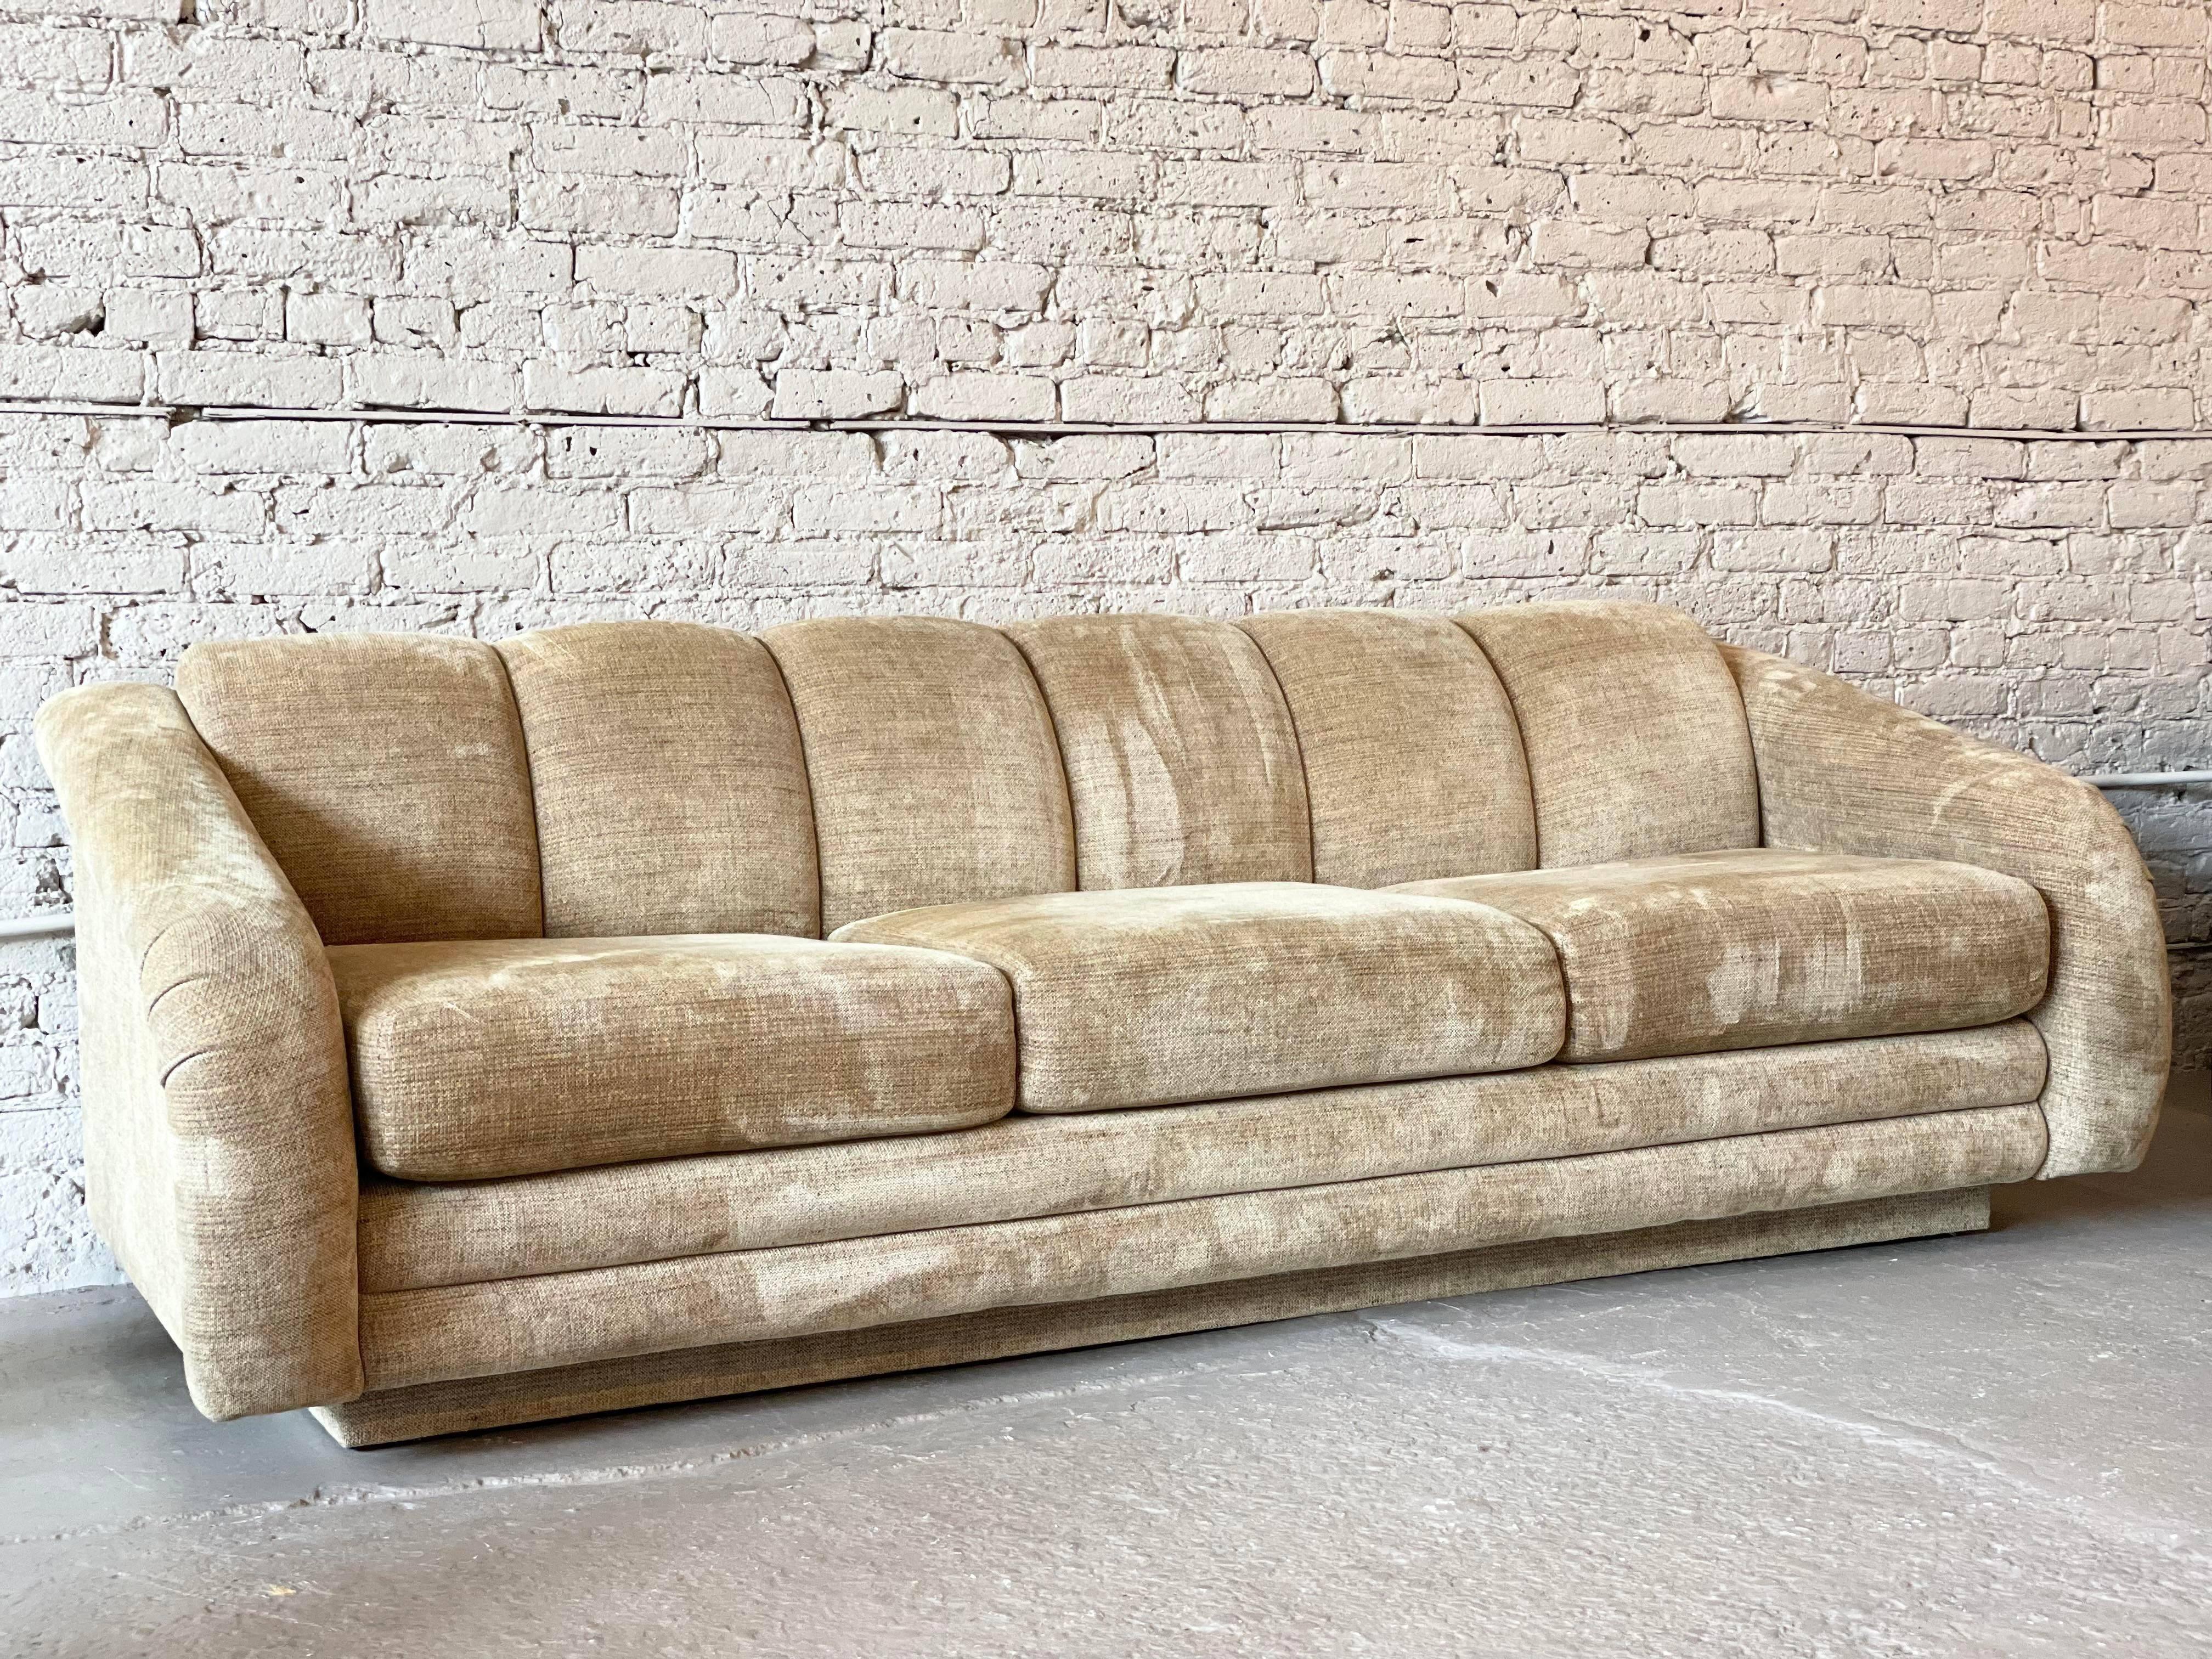 American 1980s Vintage Directional Sofa in Tan Upholstery